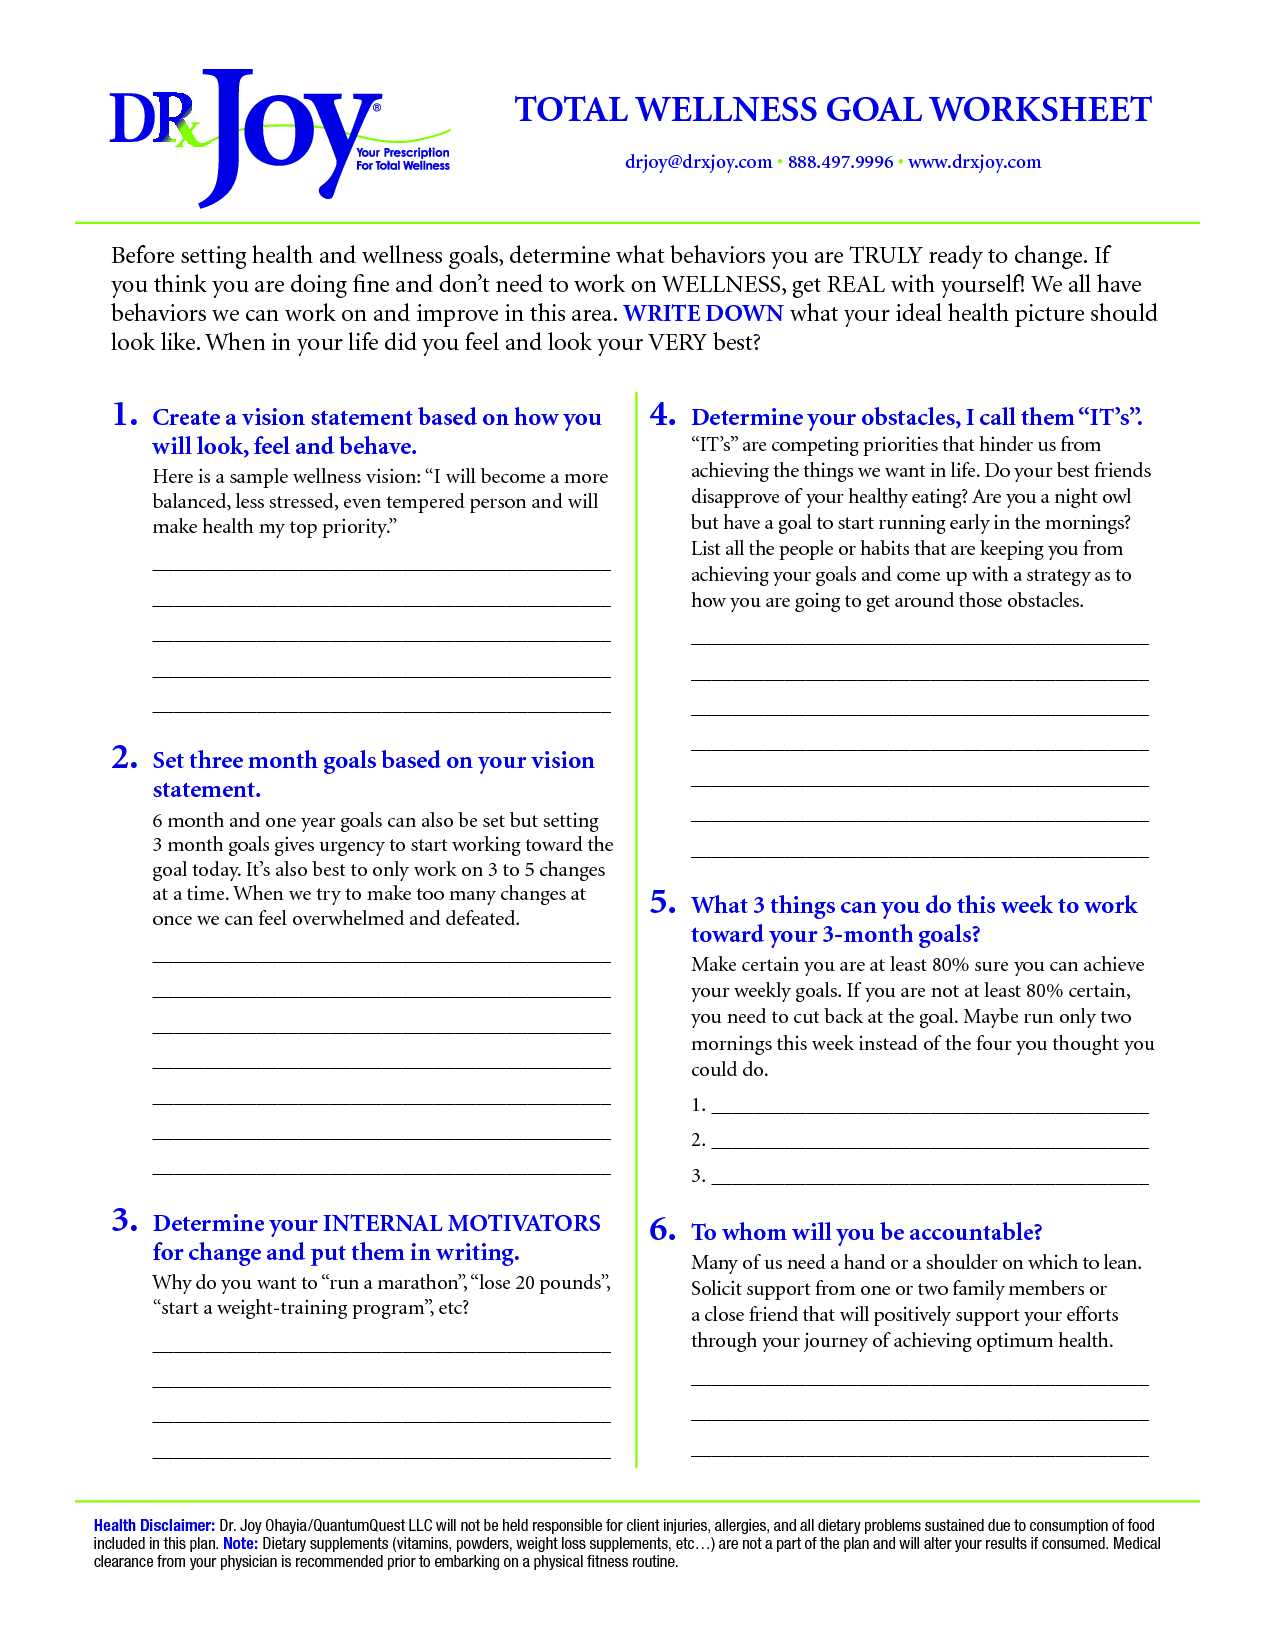 Wellness Recovery Action Plan Worksheets with Free Worksheets Library Download and Print Worksheets